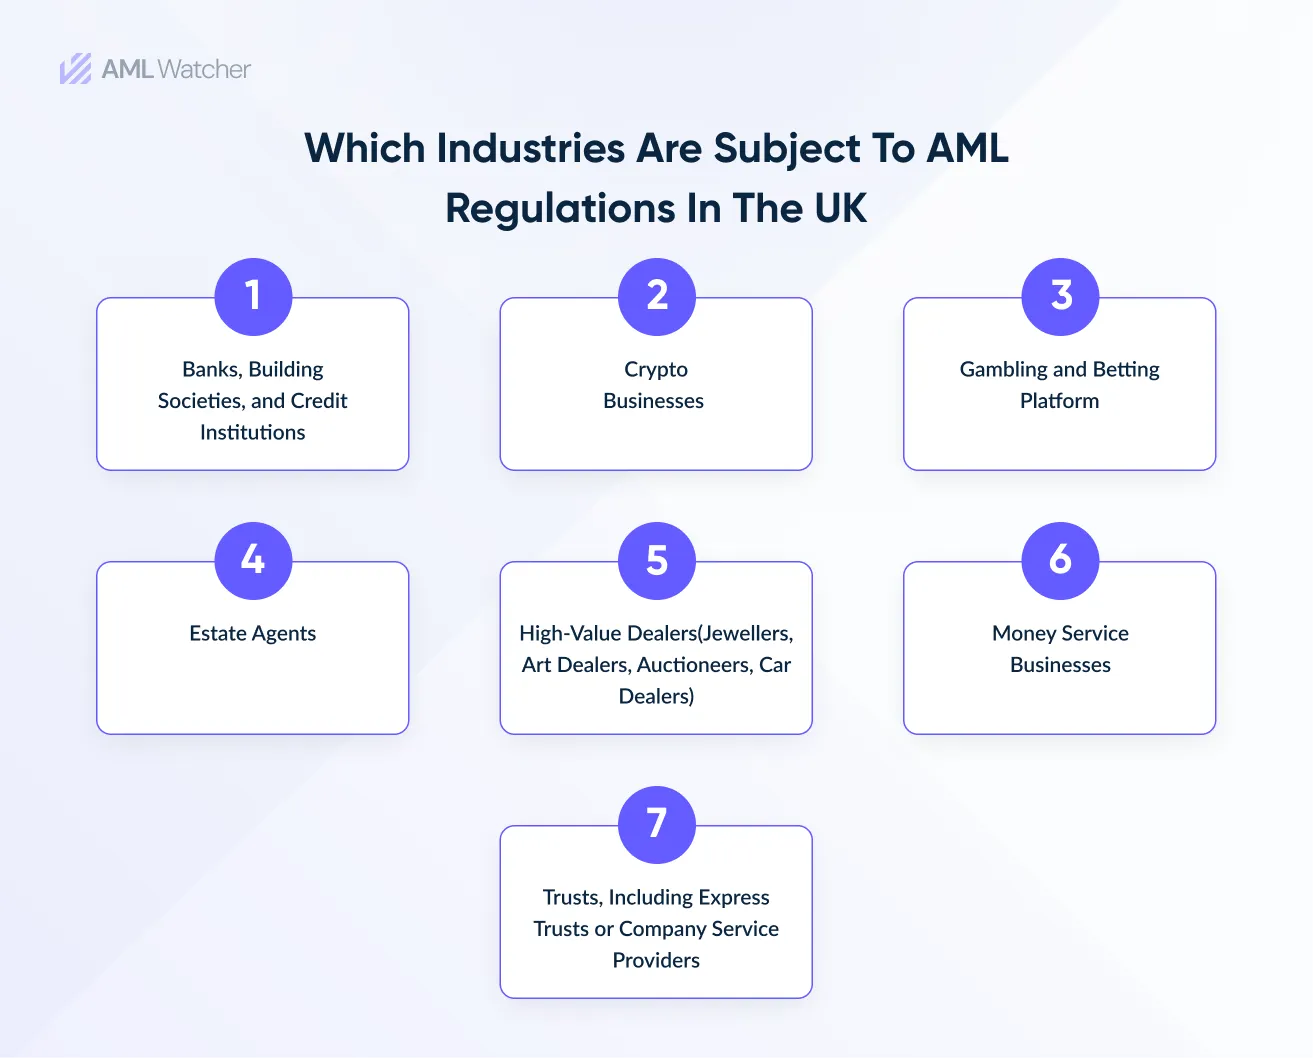 This infographic shows Industries Subject to AML Regulations